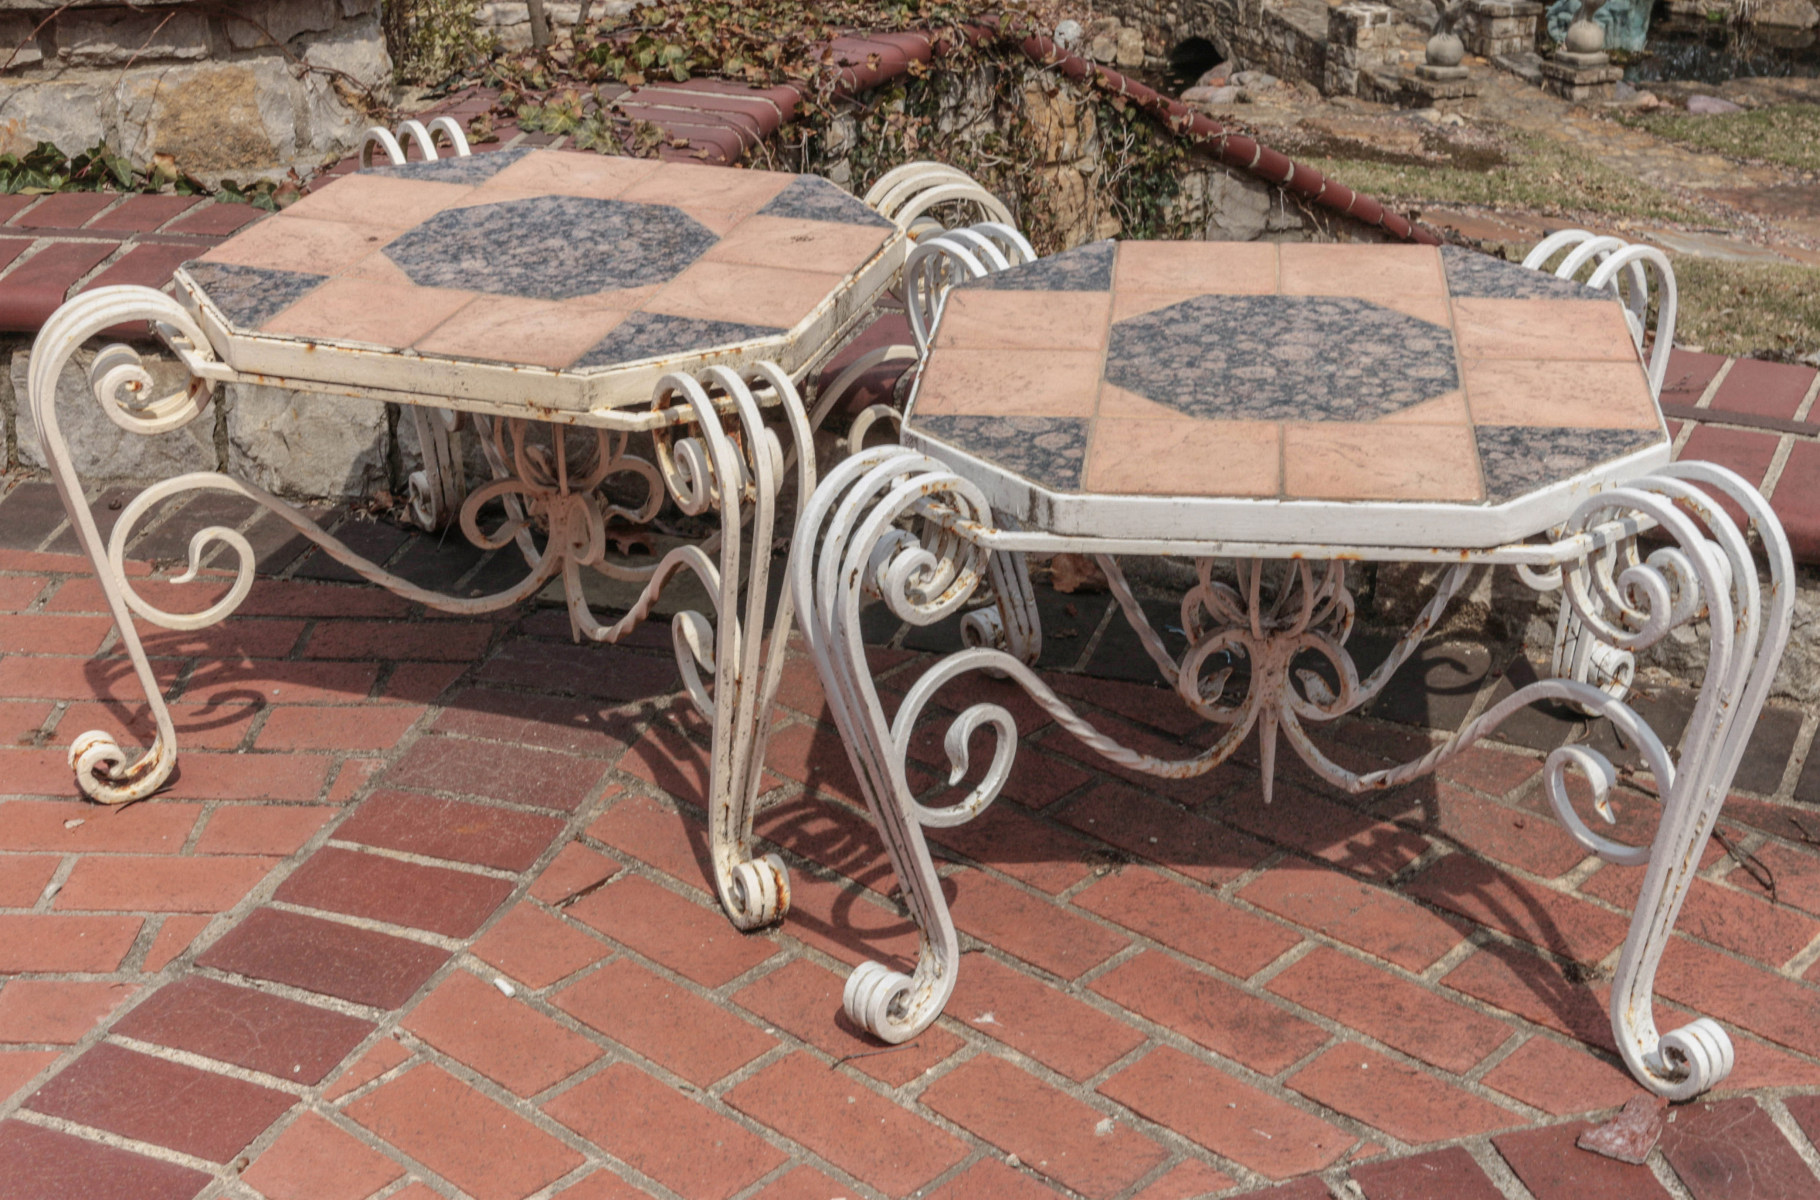 A PAIR IRON PATIO TABLES WITH GRANITE TILE TOPS